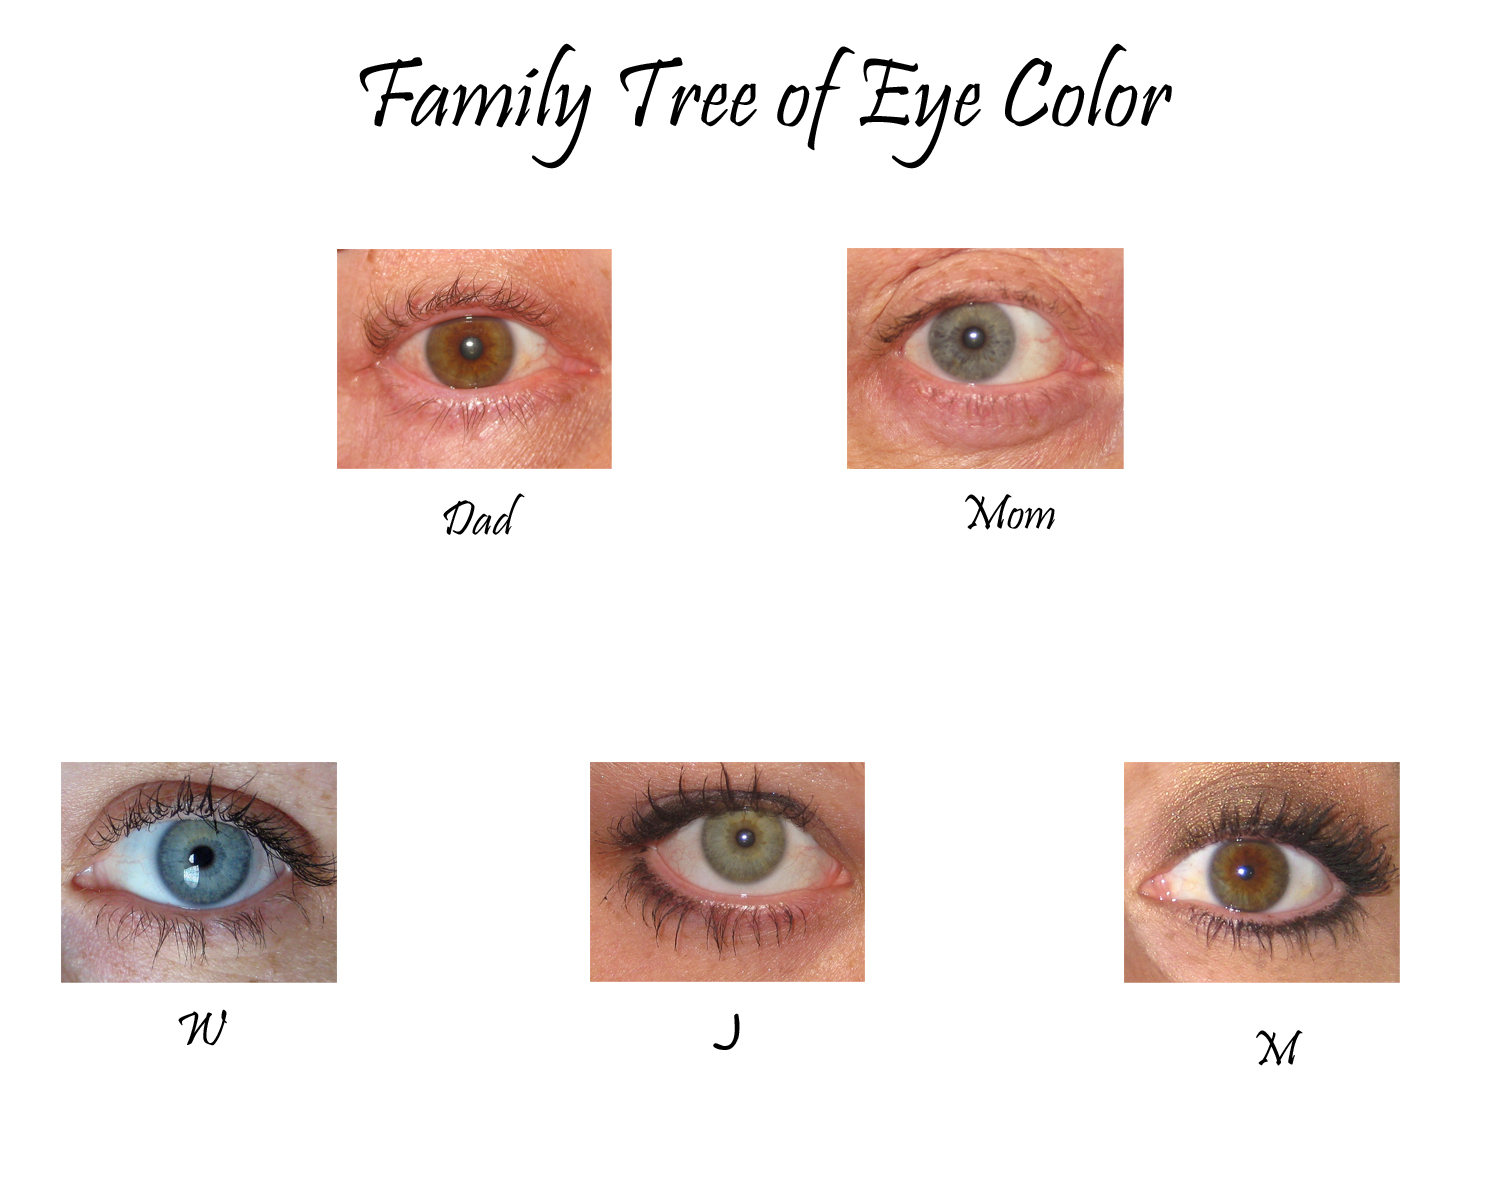 finally a captive audience eye color family tree the sequel